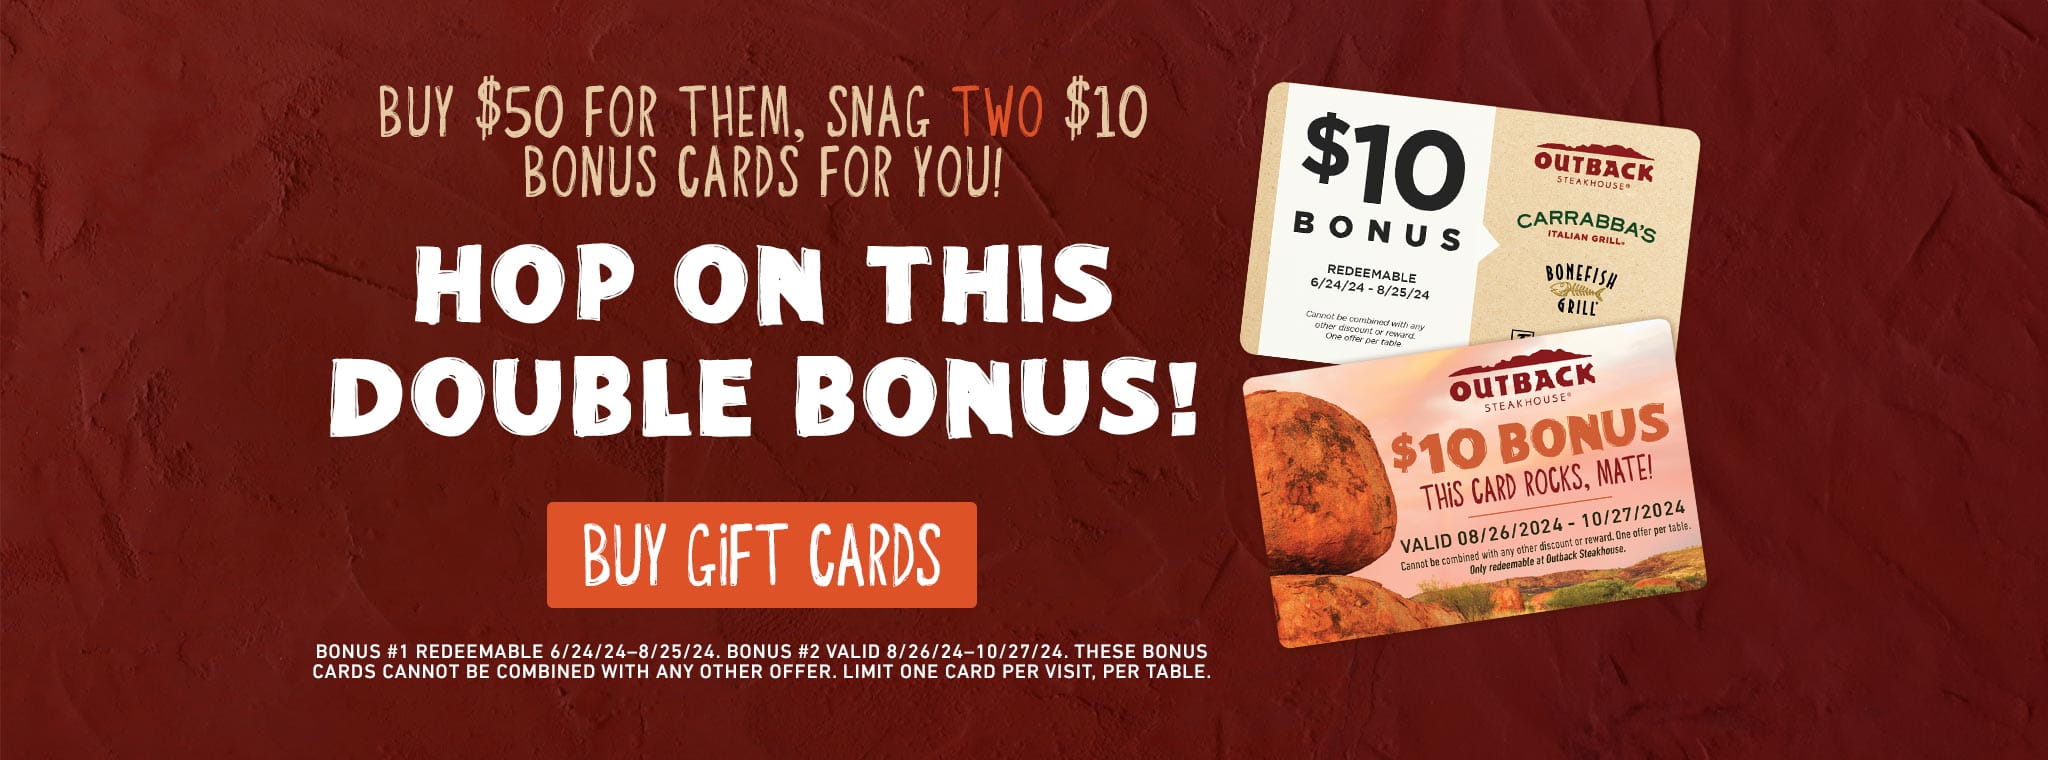 Buy $50 For Them, Snag TWO $10 Bonus For You! Hop On This Double Bonus! BUY GIFT CARDS